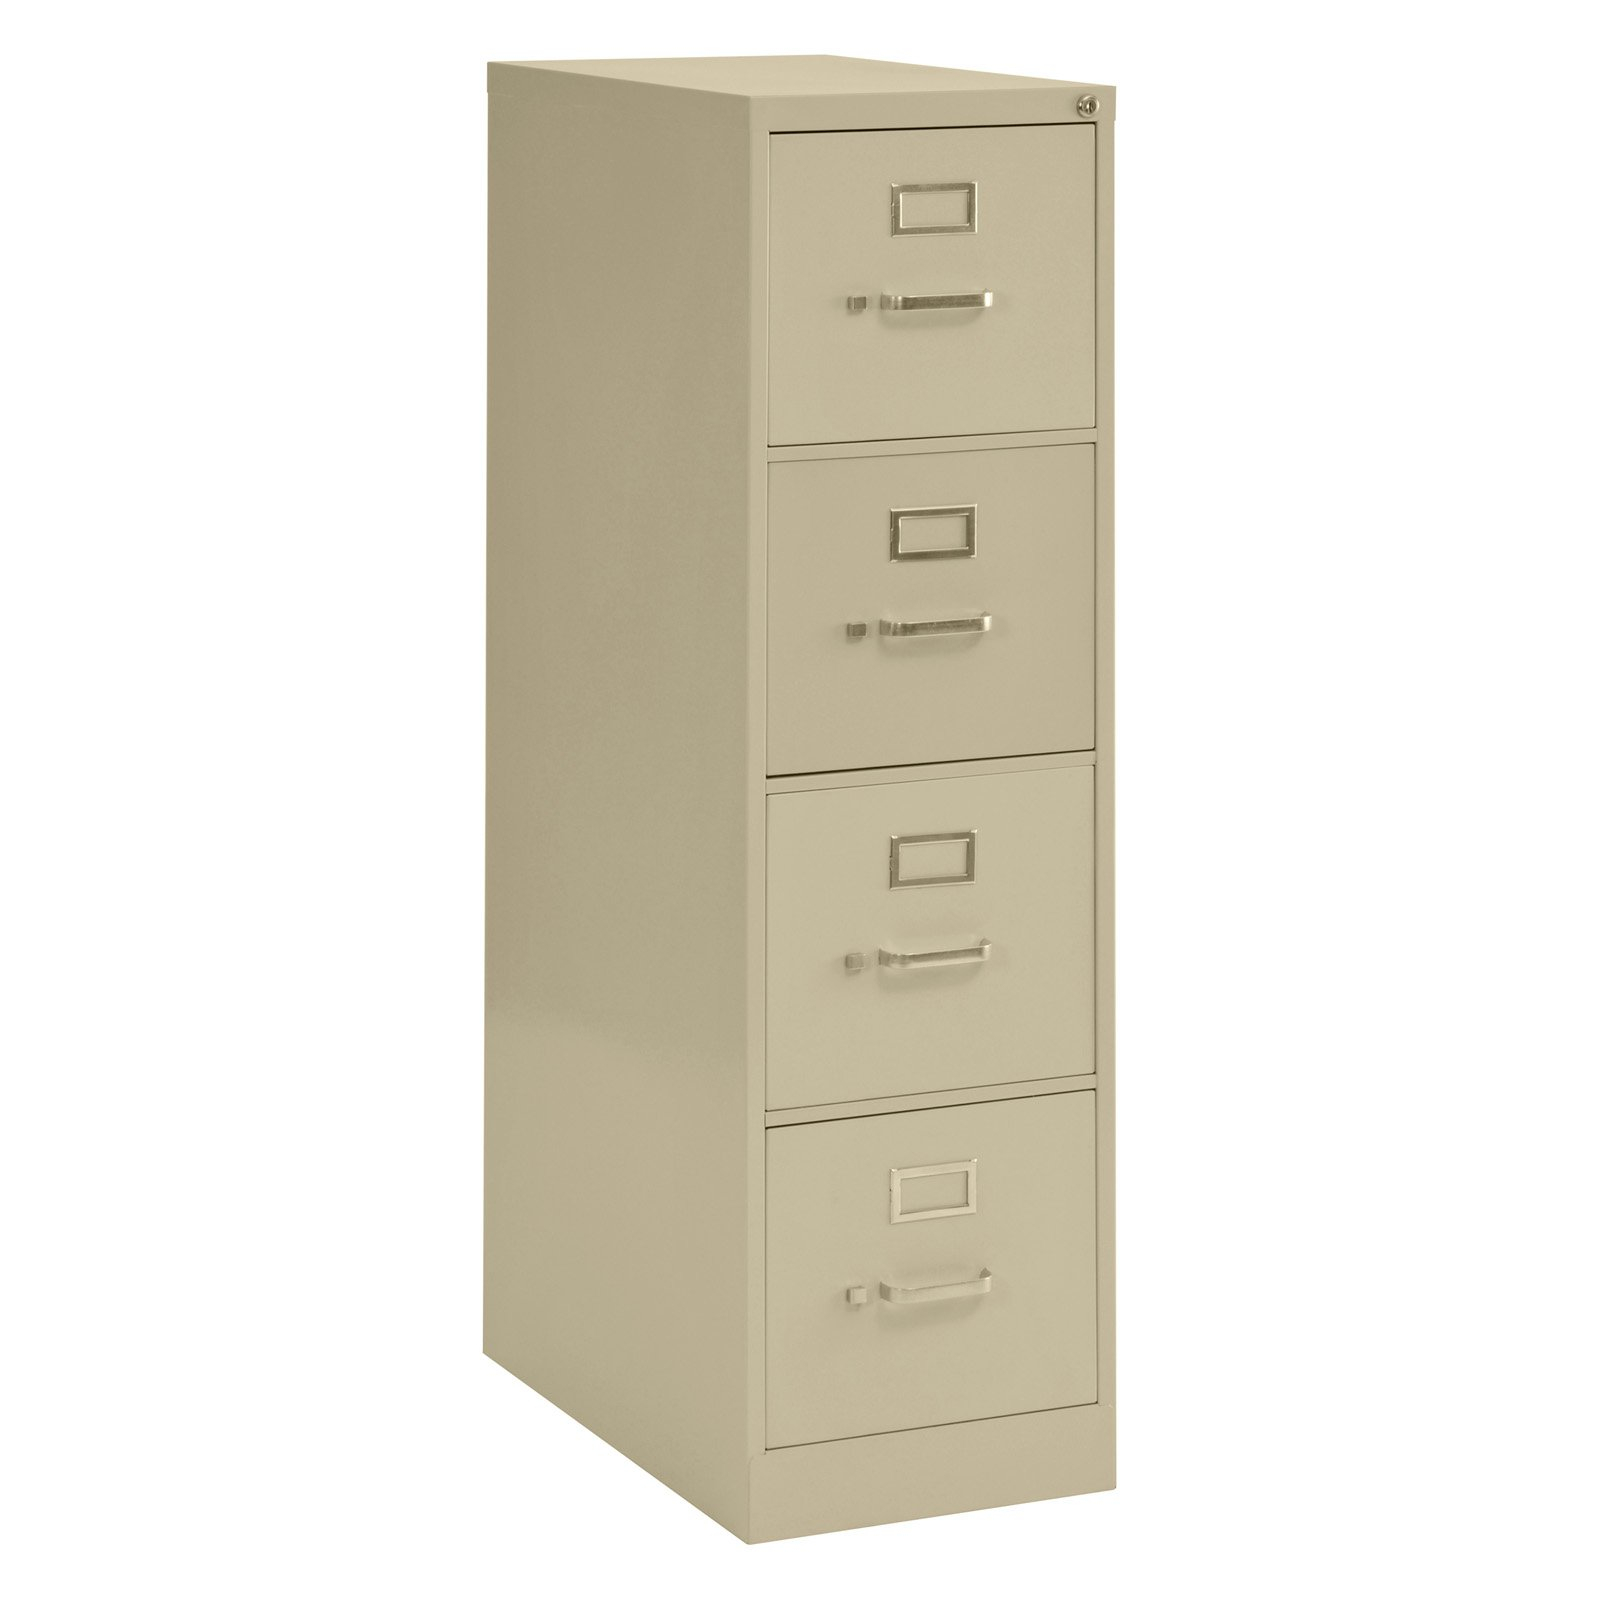 4 Drawer Legal Size Steel Vertical File Cabinet Dove Grey Walmart throughout proportions 1600 X 1600